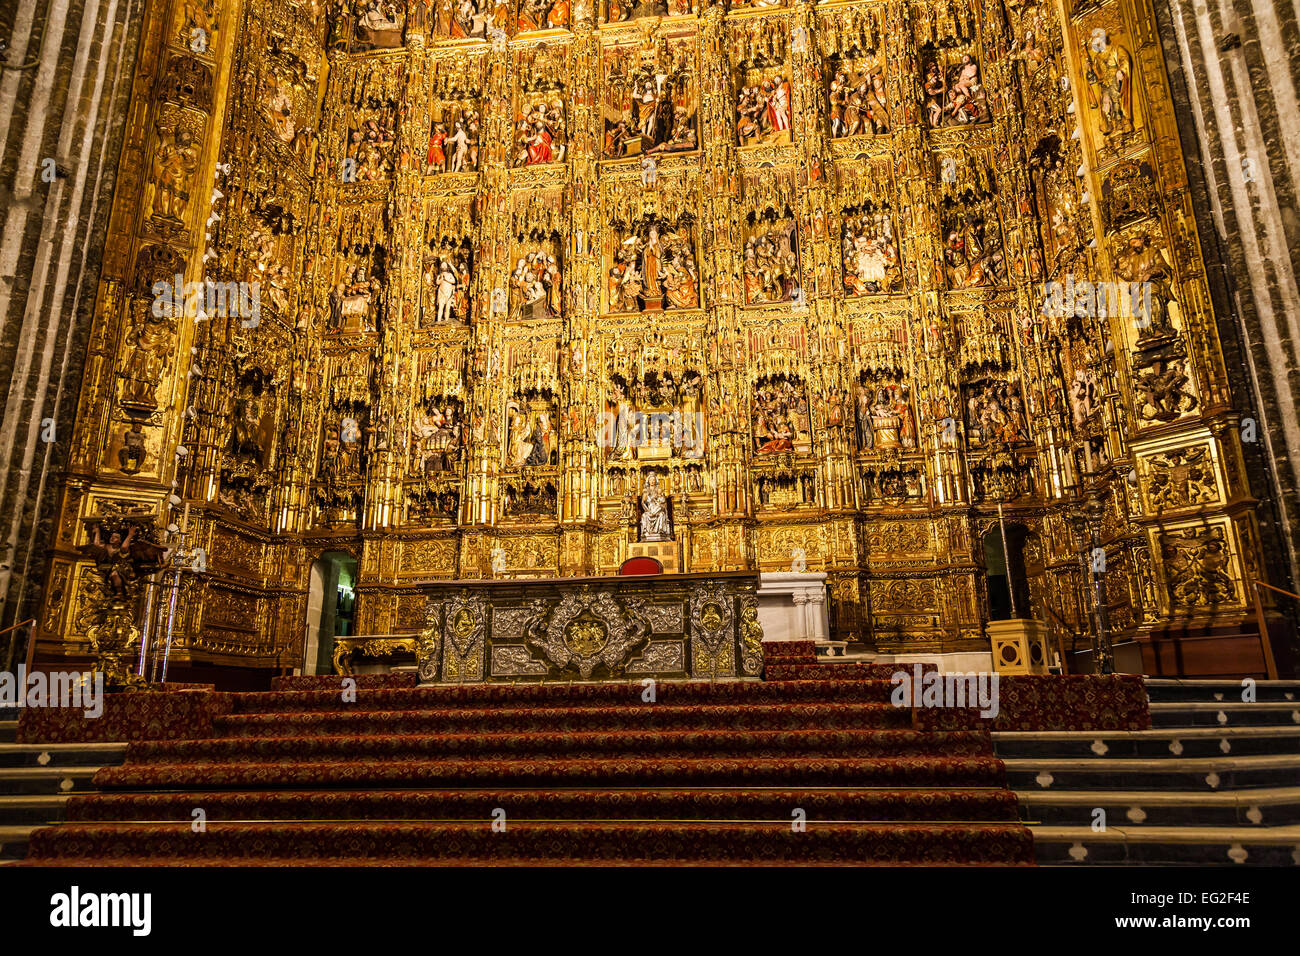 Seville, Spain. Main Altar made of gold, 400 years old Stock Photo